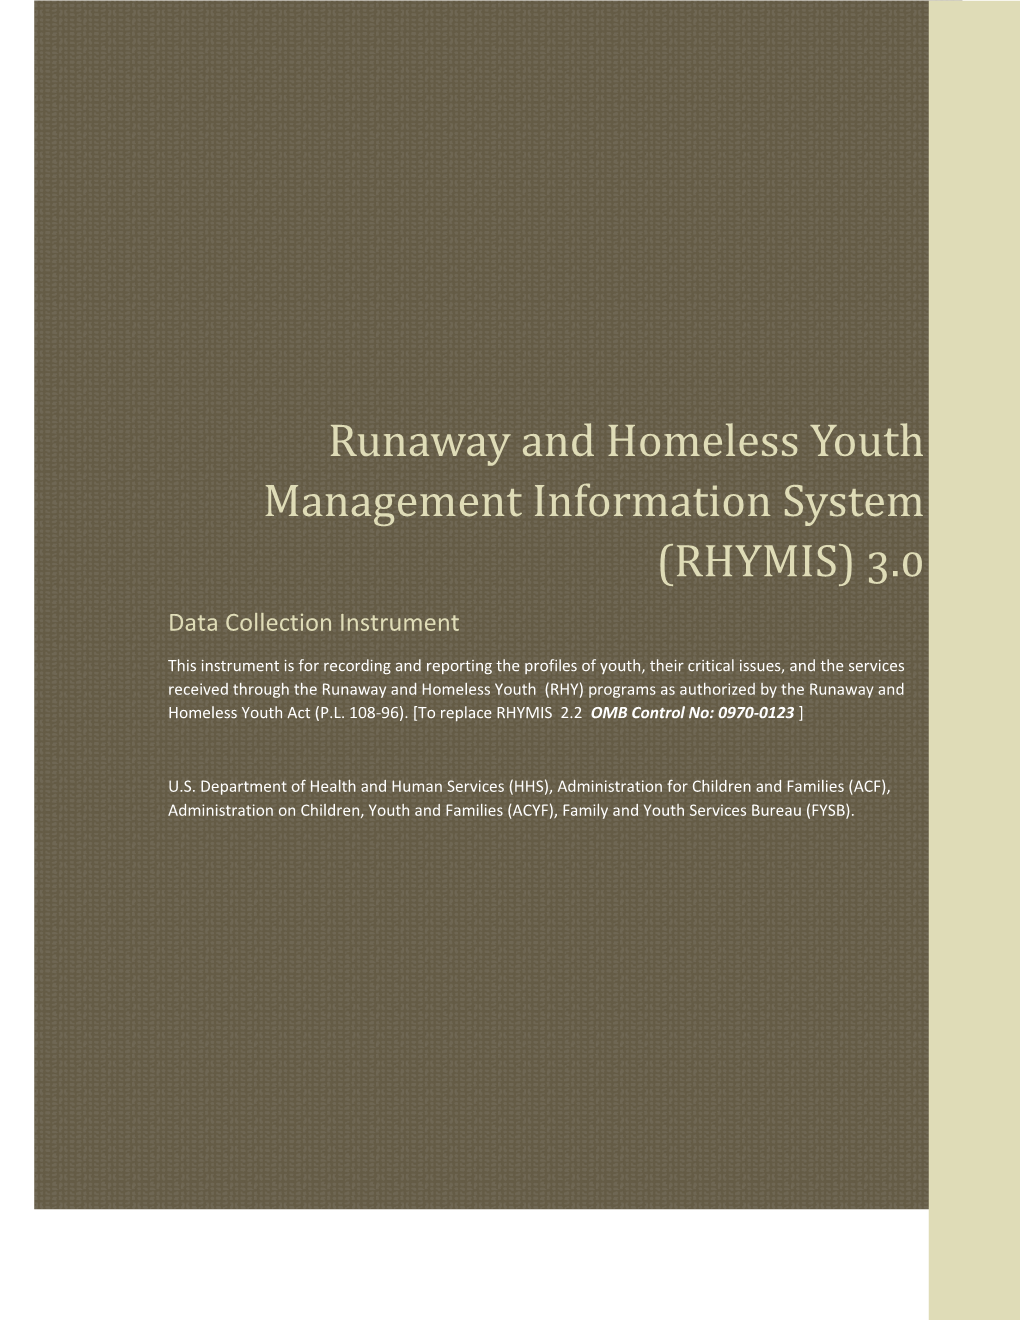 Runaway and Homeless Youth Management Information System (RHYMIS) 3.0 Data Collection Instrument